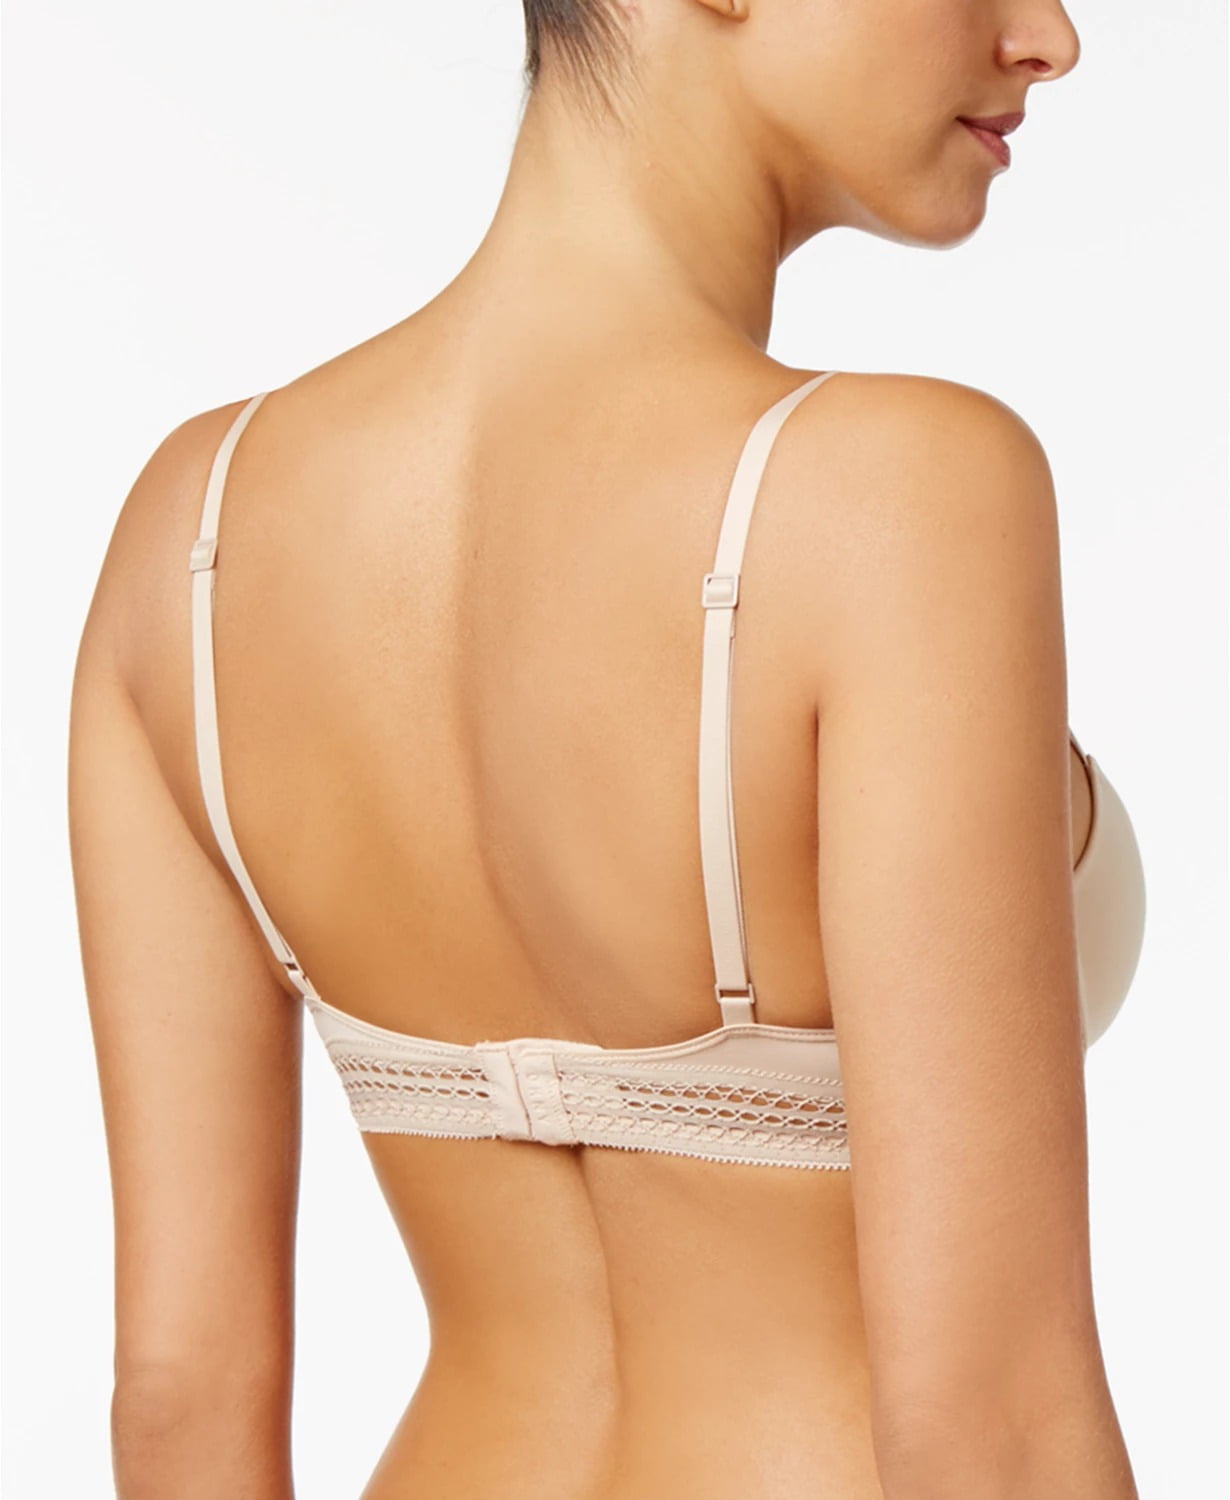 NWT DKNY Classic Cotton Lace Trim Underwire Balconette Bra 36D NEW  (Off-White) - AbuMaizar Dental Roots Clinic